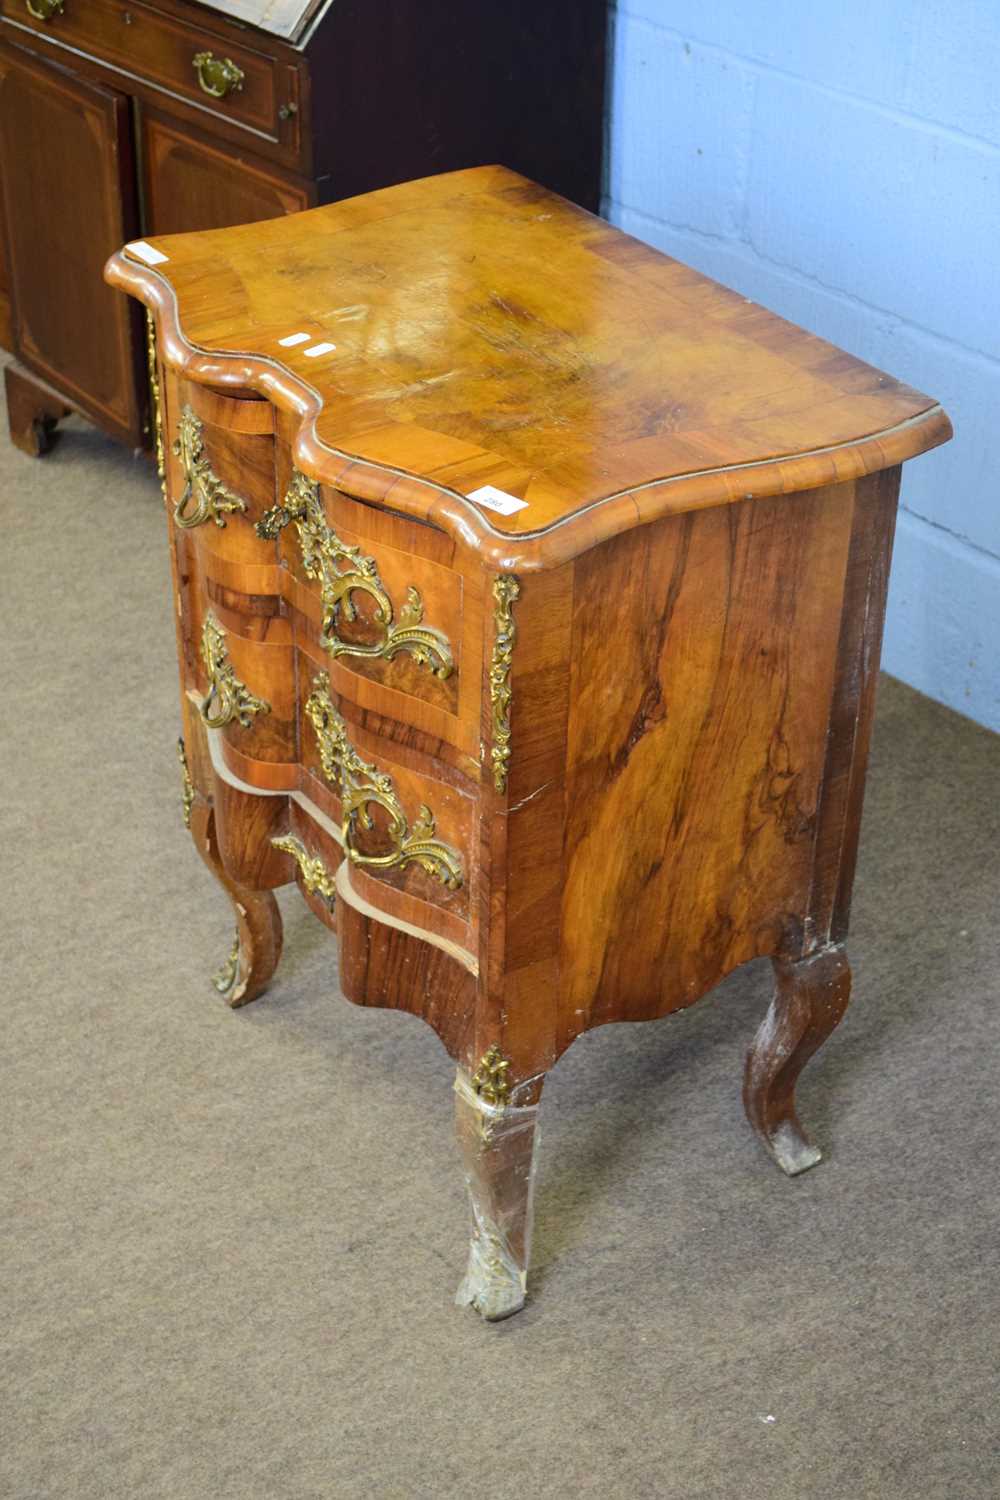 19th century Continental walnut veneered serpentine front two drawer chest with ornate gilt metal - Image 2 of 2